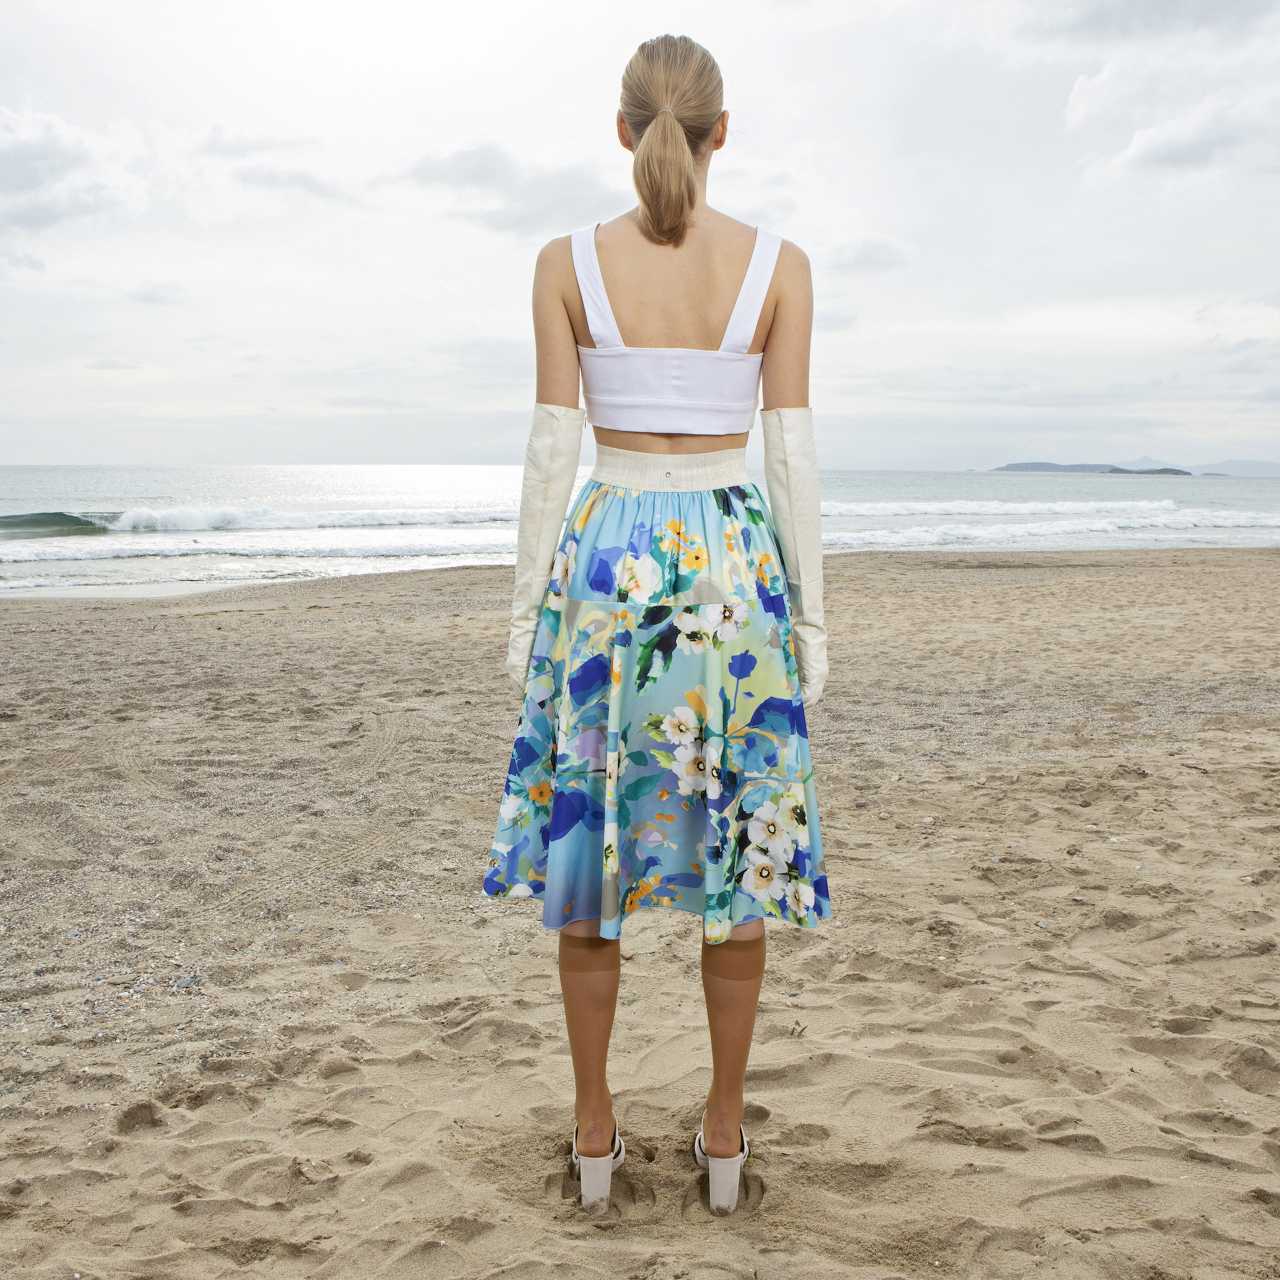 Product preview: Tulle Tutu Skirt Midi Patterned Shades of Blue Skirt